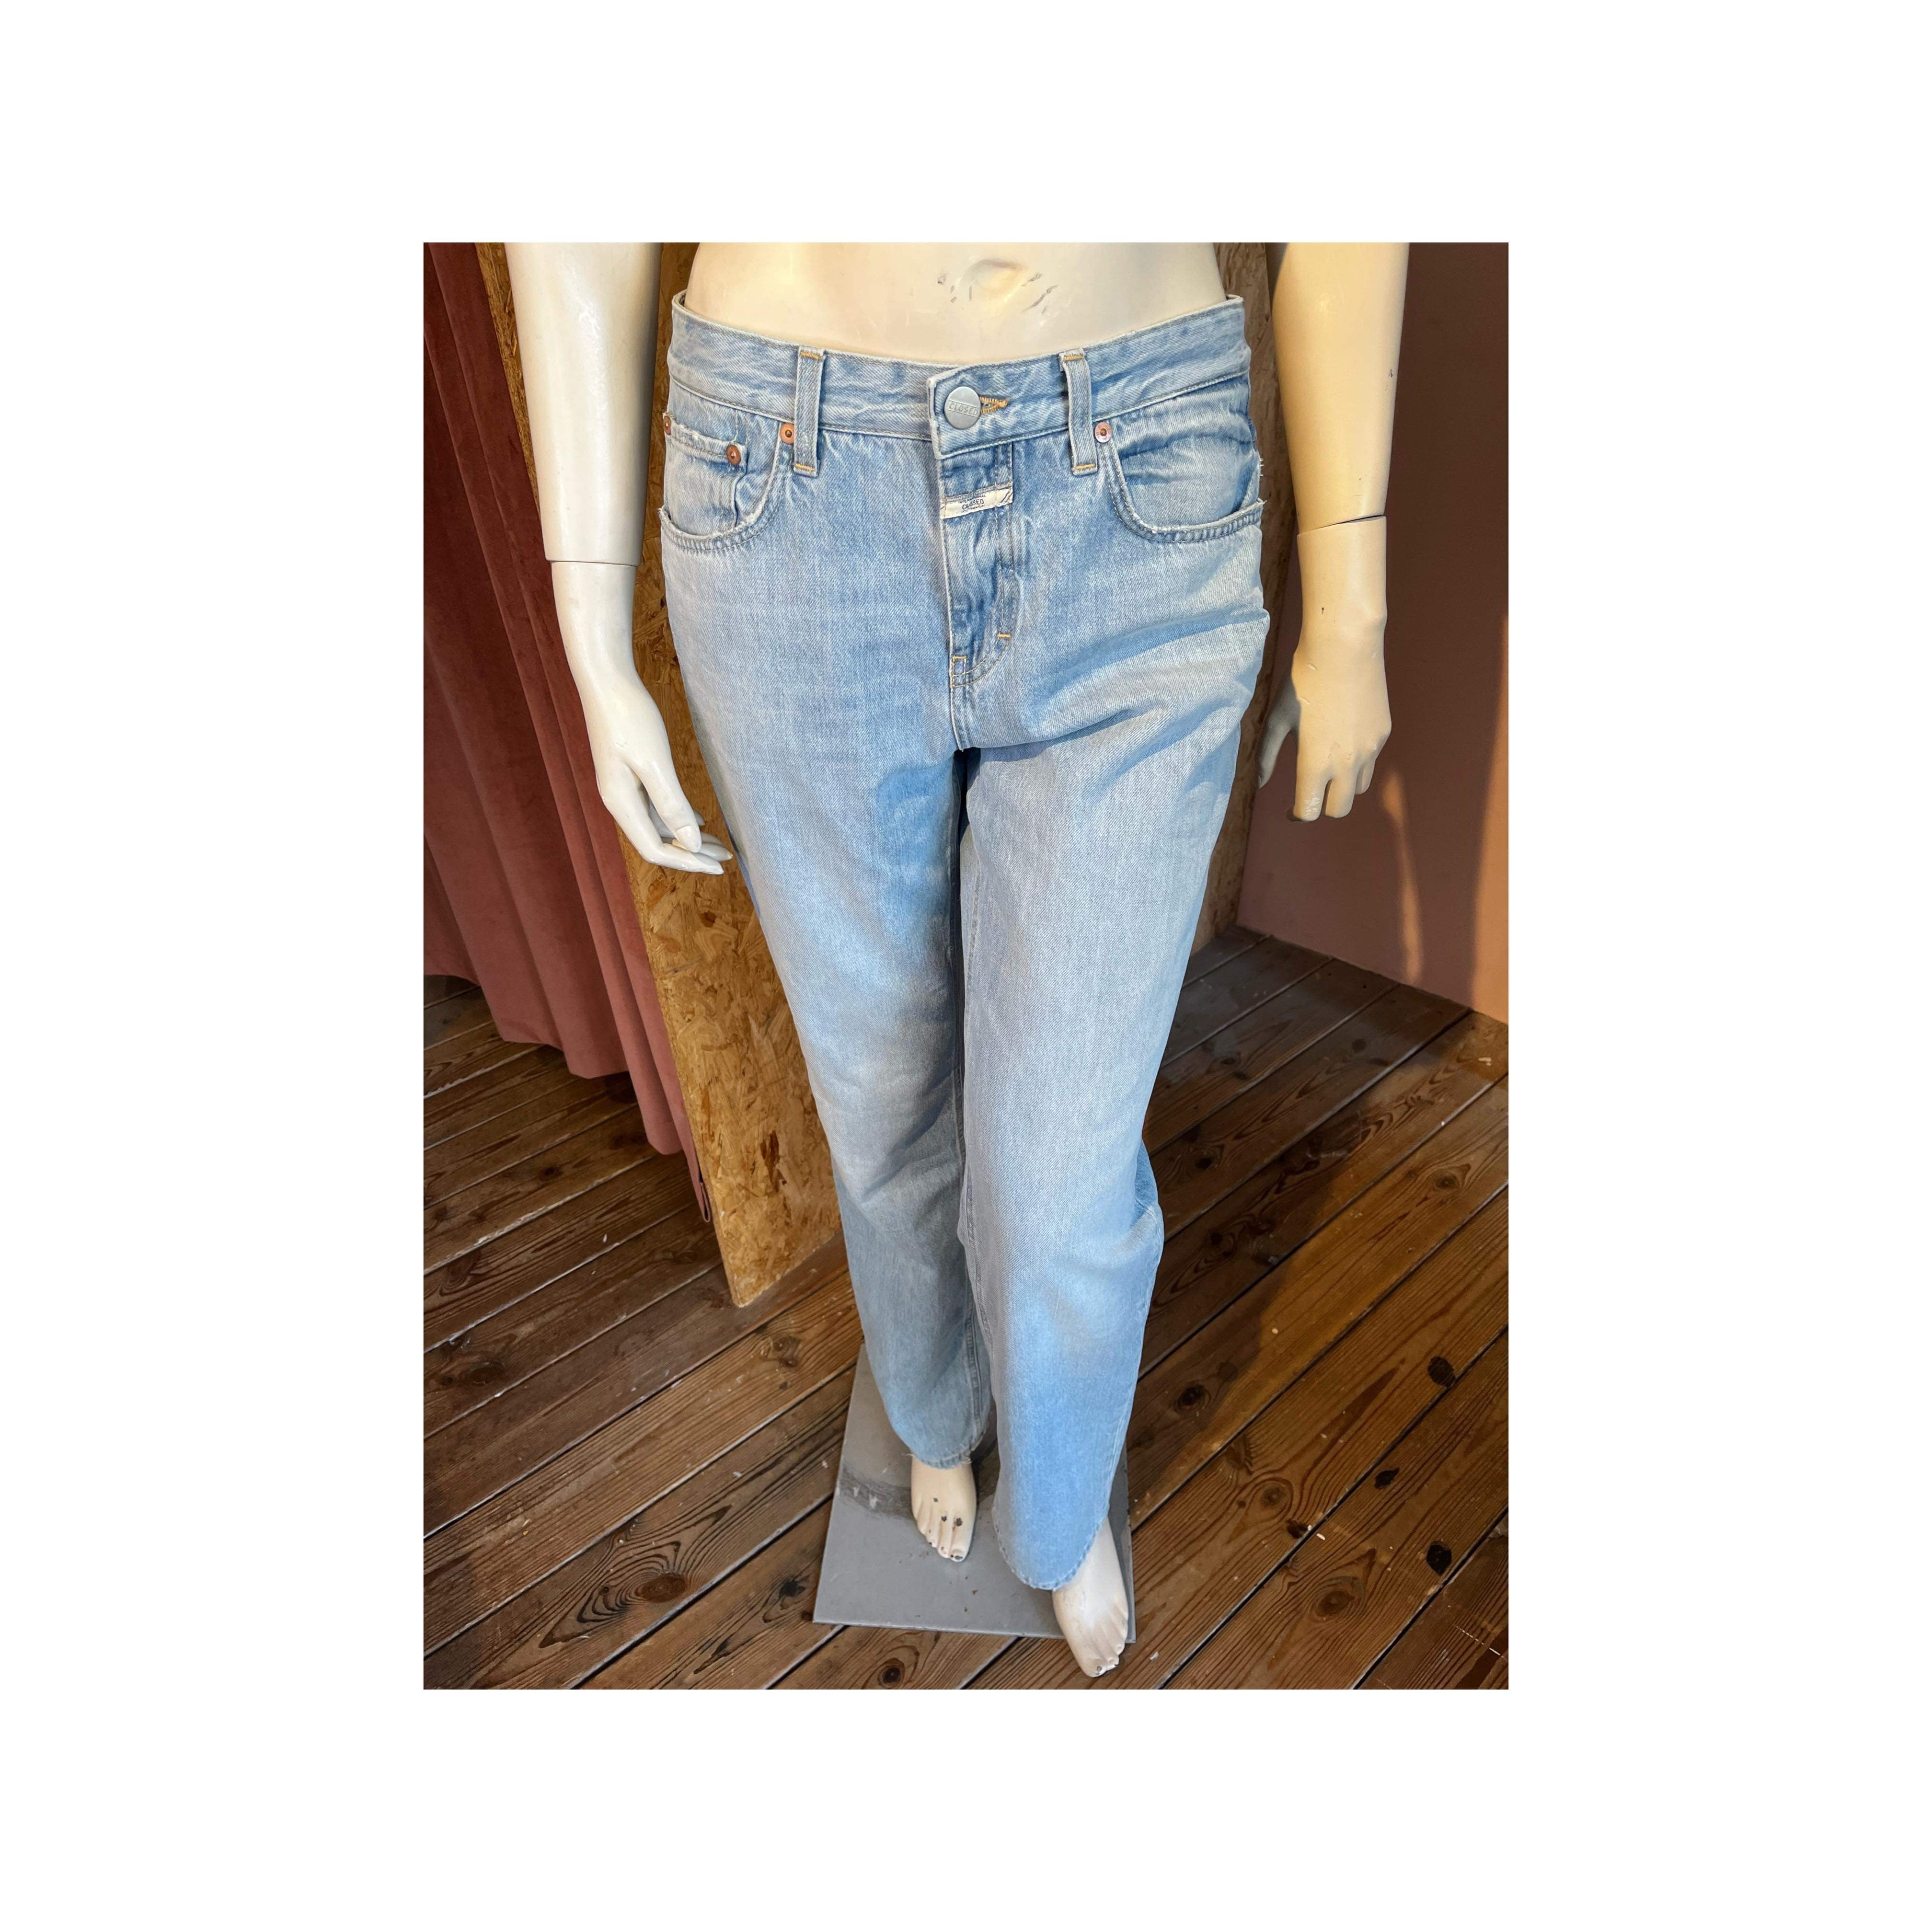 Closed - Jeans - Size: 27